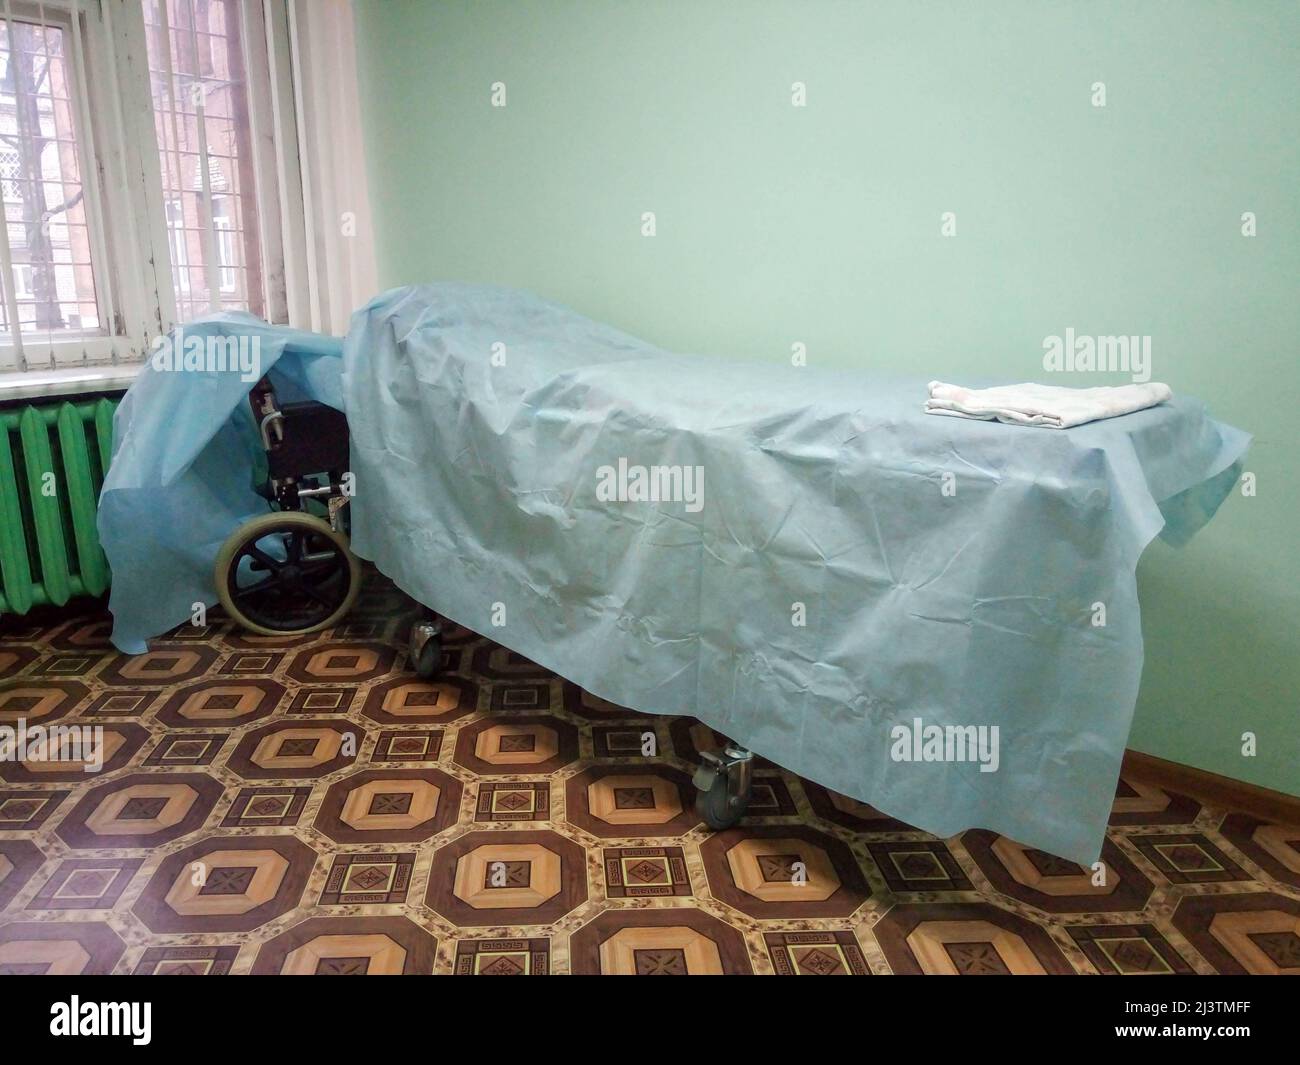 A wheelchair bed covered with a blue sheet, or a stretcher on wheels for transporting bedridden patients along the hospital corridor. Stock Photo